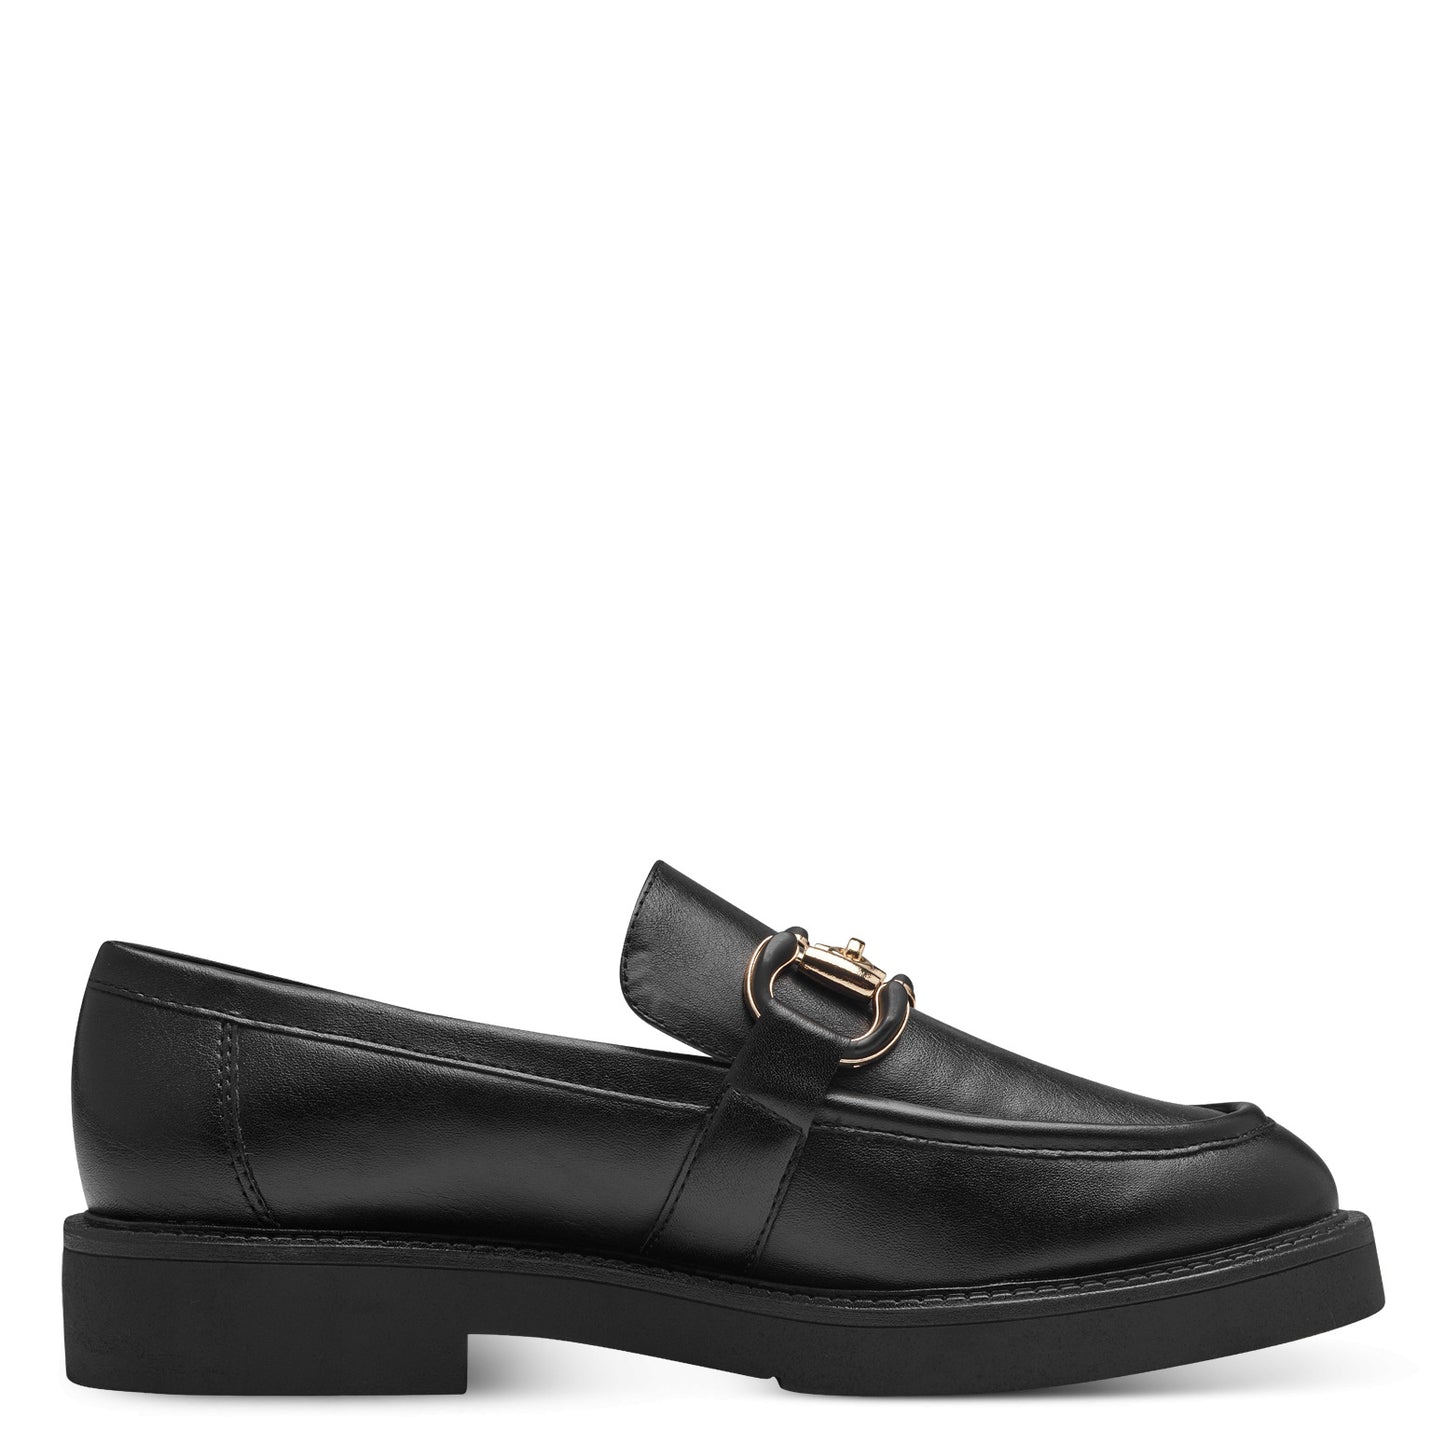 Marco Tozzi - Ladies Shoes Loafers Black (2103)